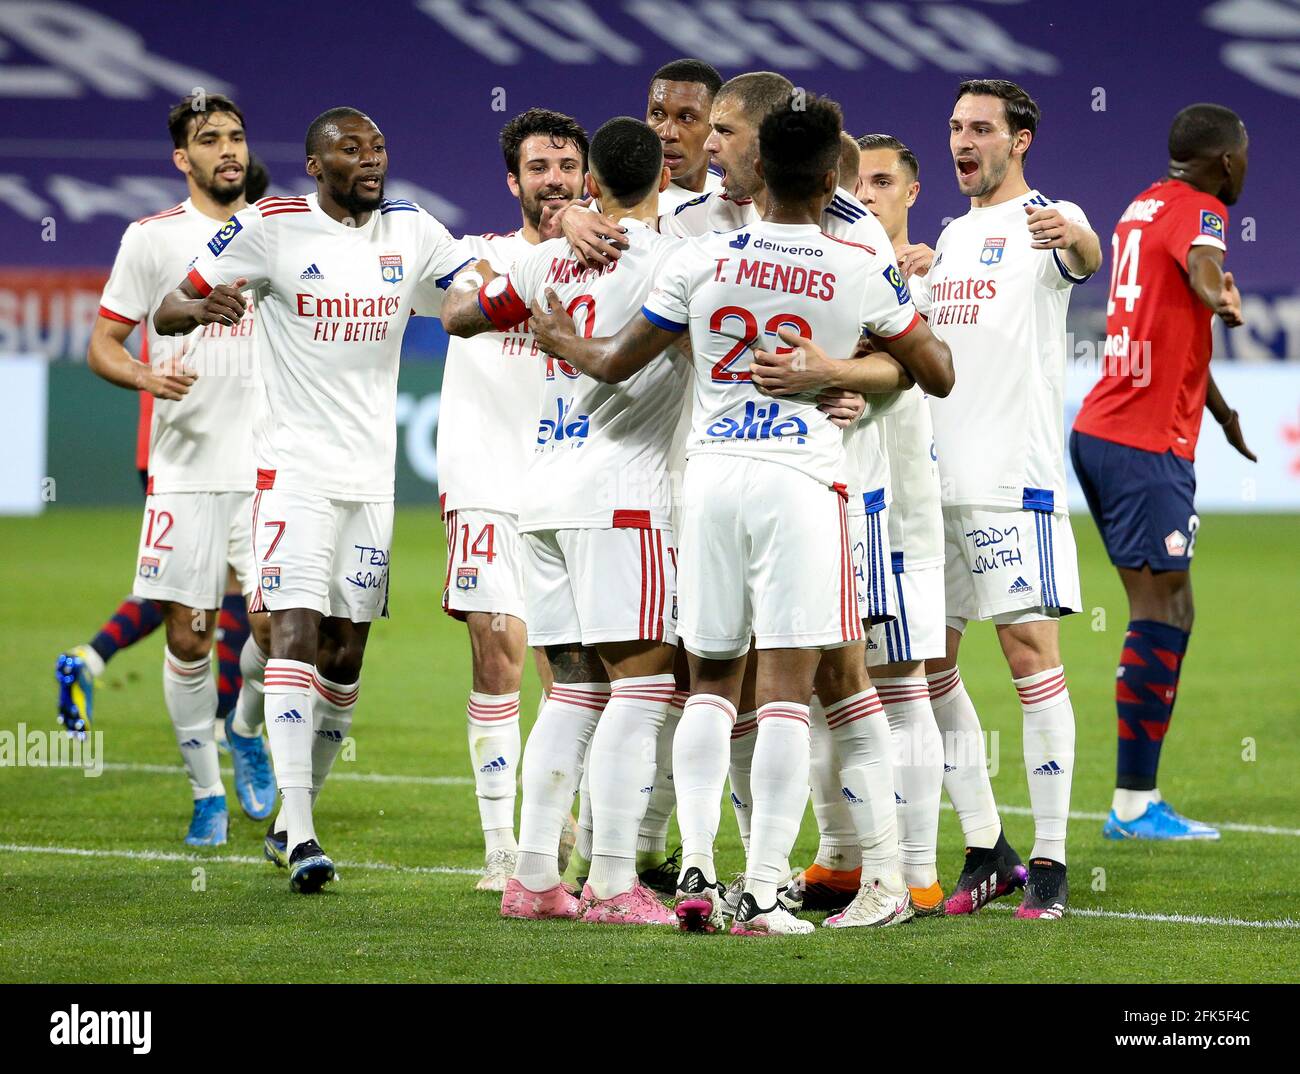 https://c8.alamy.com/comp/2FK5F4C/players-of-lyon-celebrate-their-second-goal-during-the-french-championship-ligue-1-football-match-between-olympique-lyonnais-ol-and-lille-osc-losc-on-april-25-2021-at-groupama-stadium-in-decines-near-lyon-france-photo-jean-catuffe-dppi-2FK5F4C.jpg